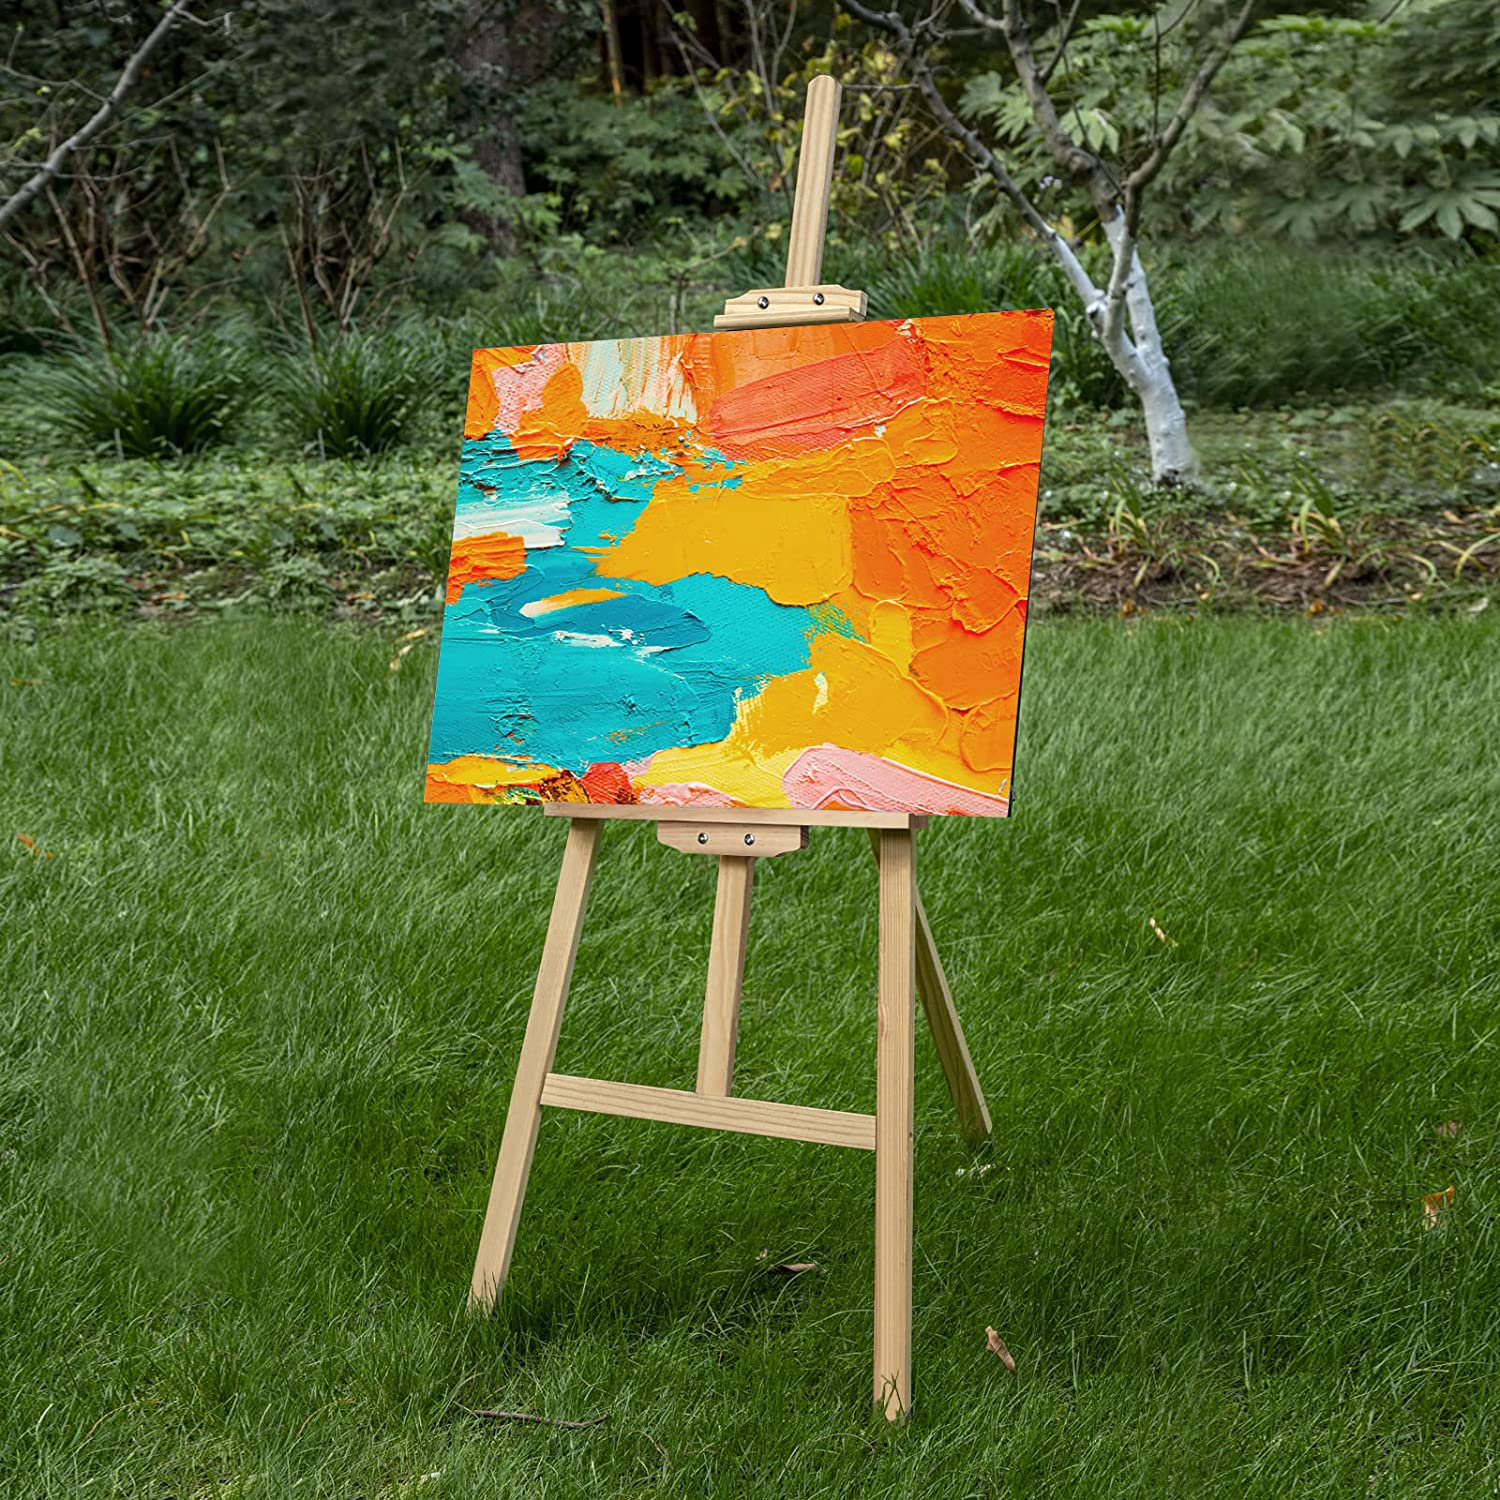  Oil Painting Easel, Stable Lightweight Miniature